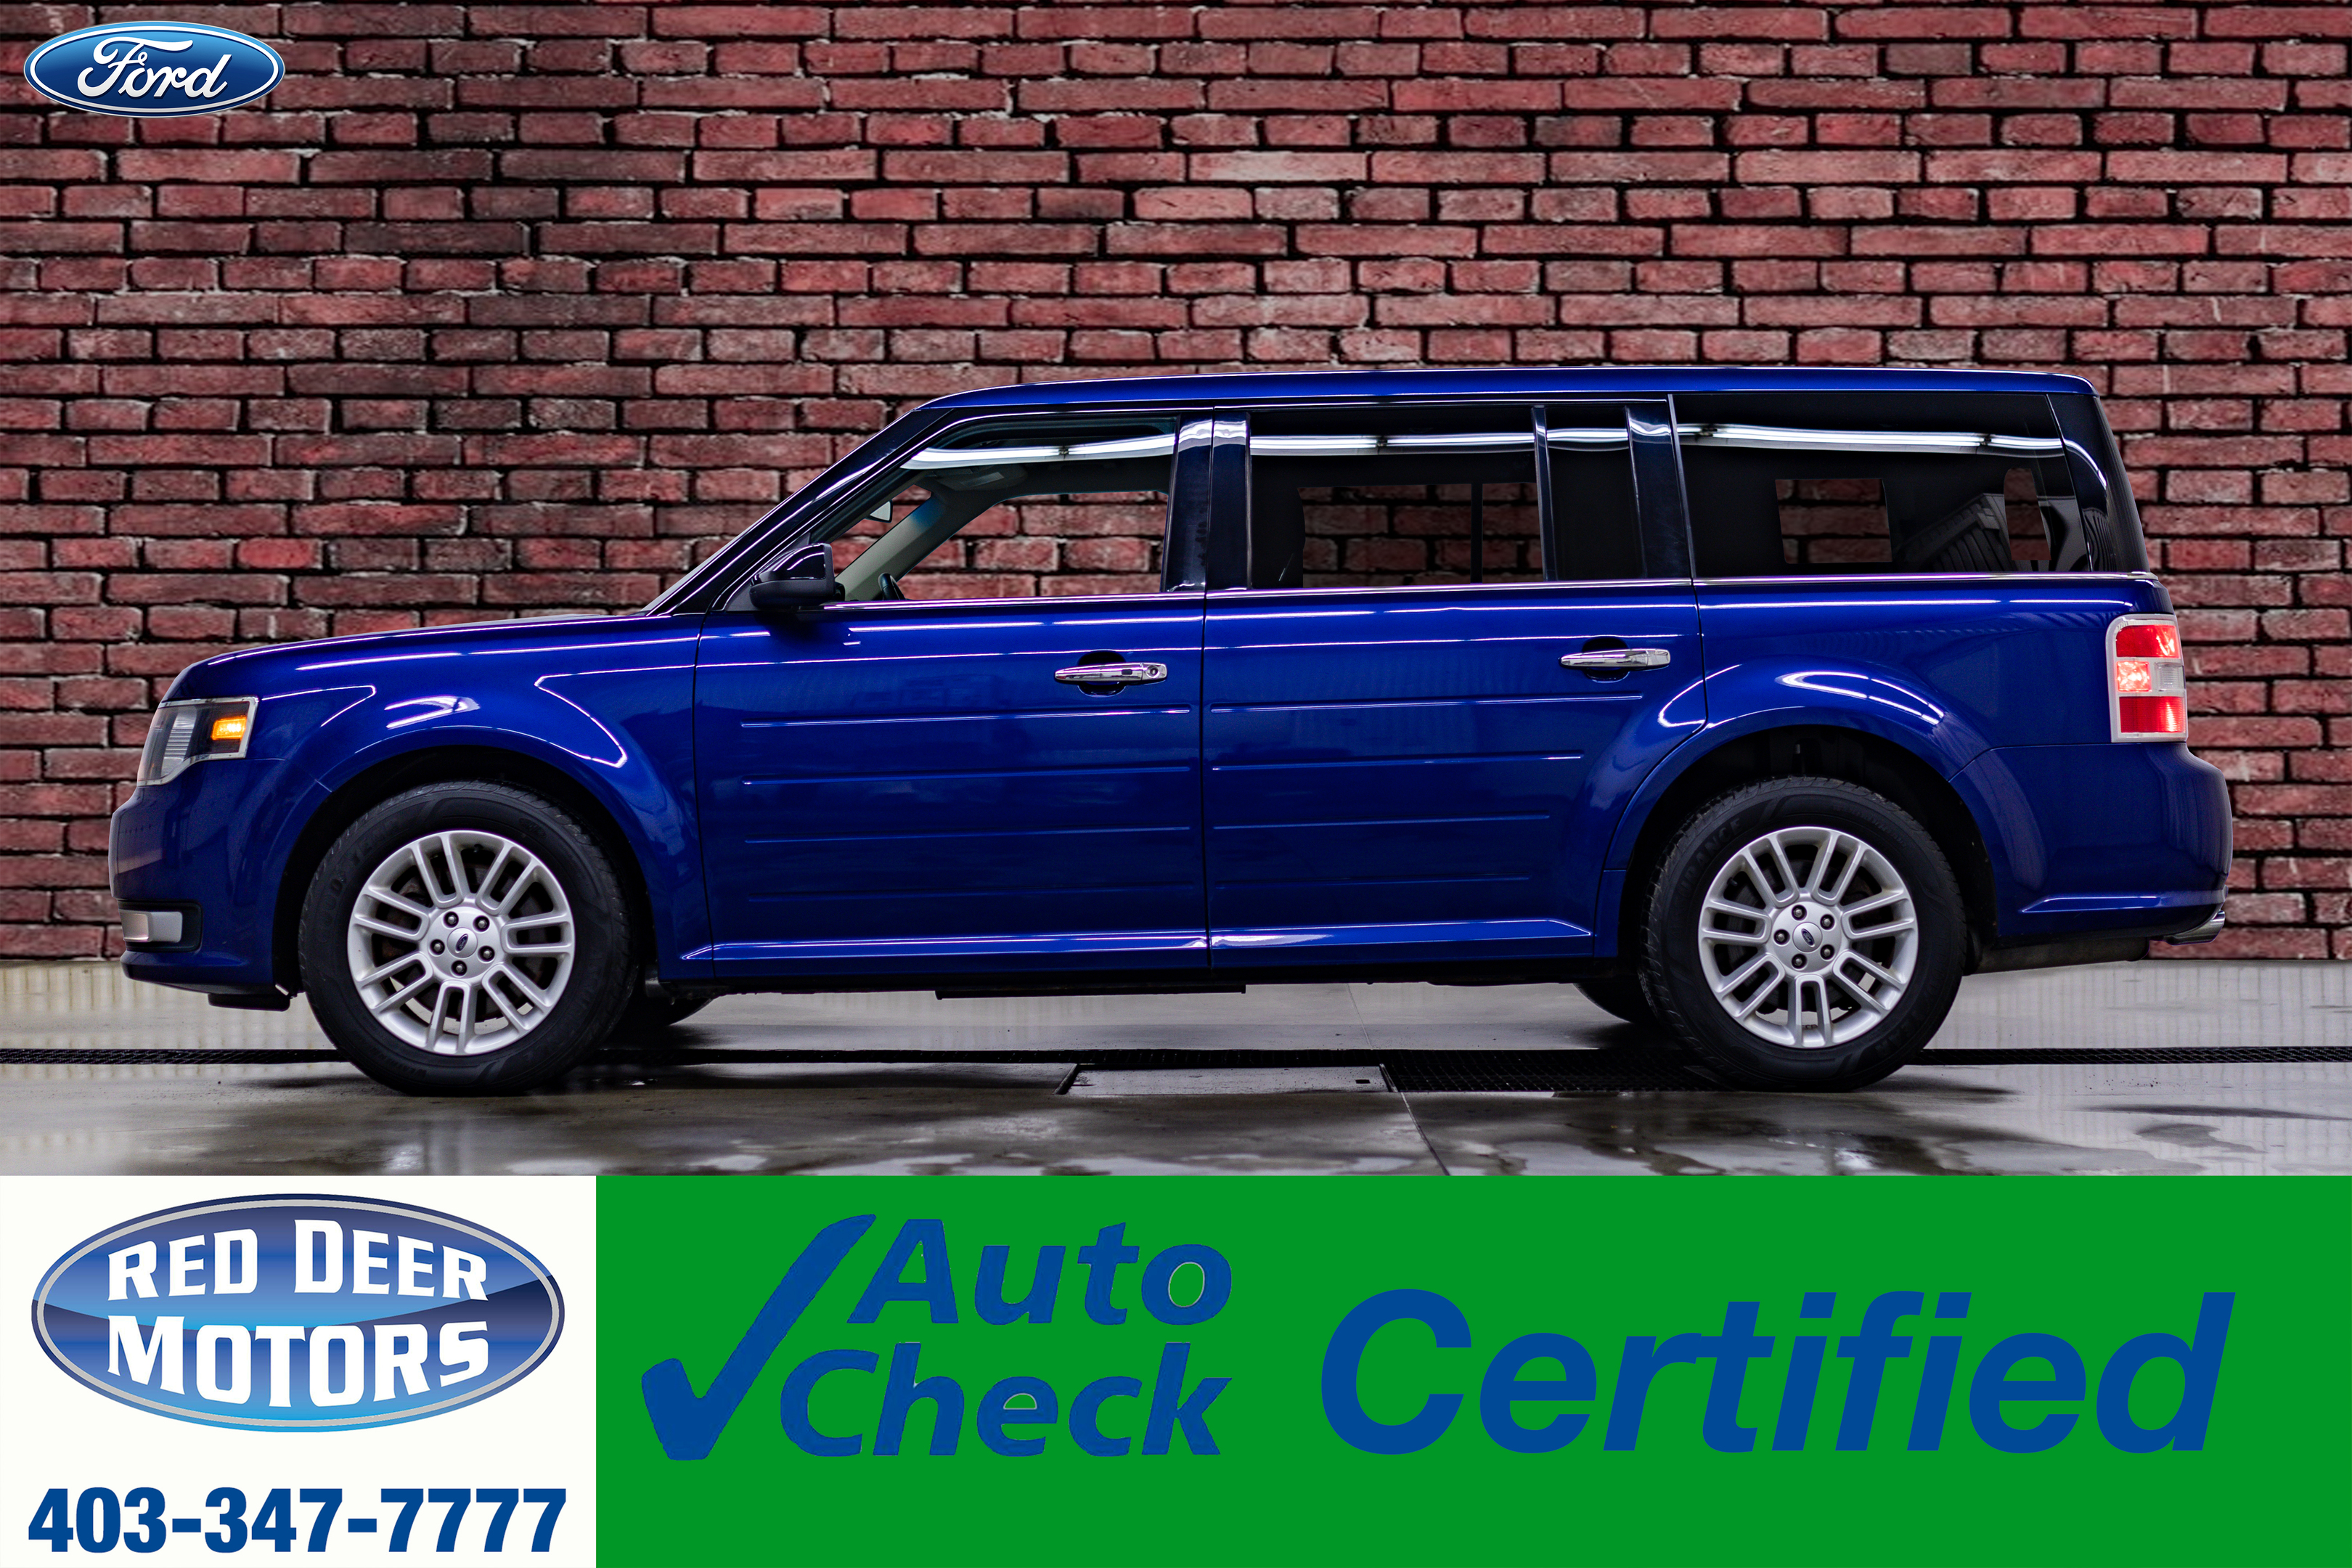 2015 Ford Flex AWD SEL Pseat 3rd Row